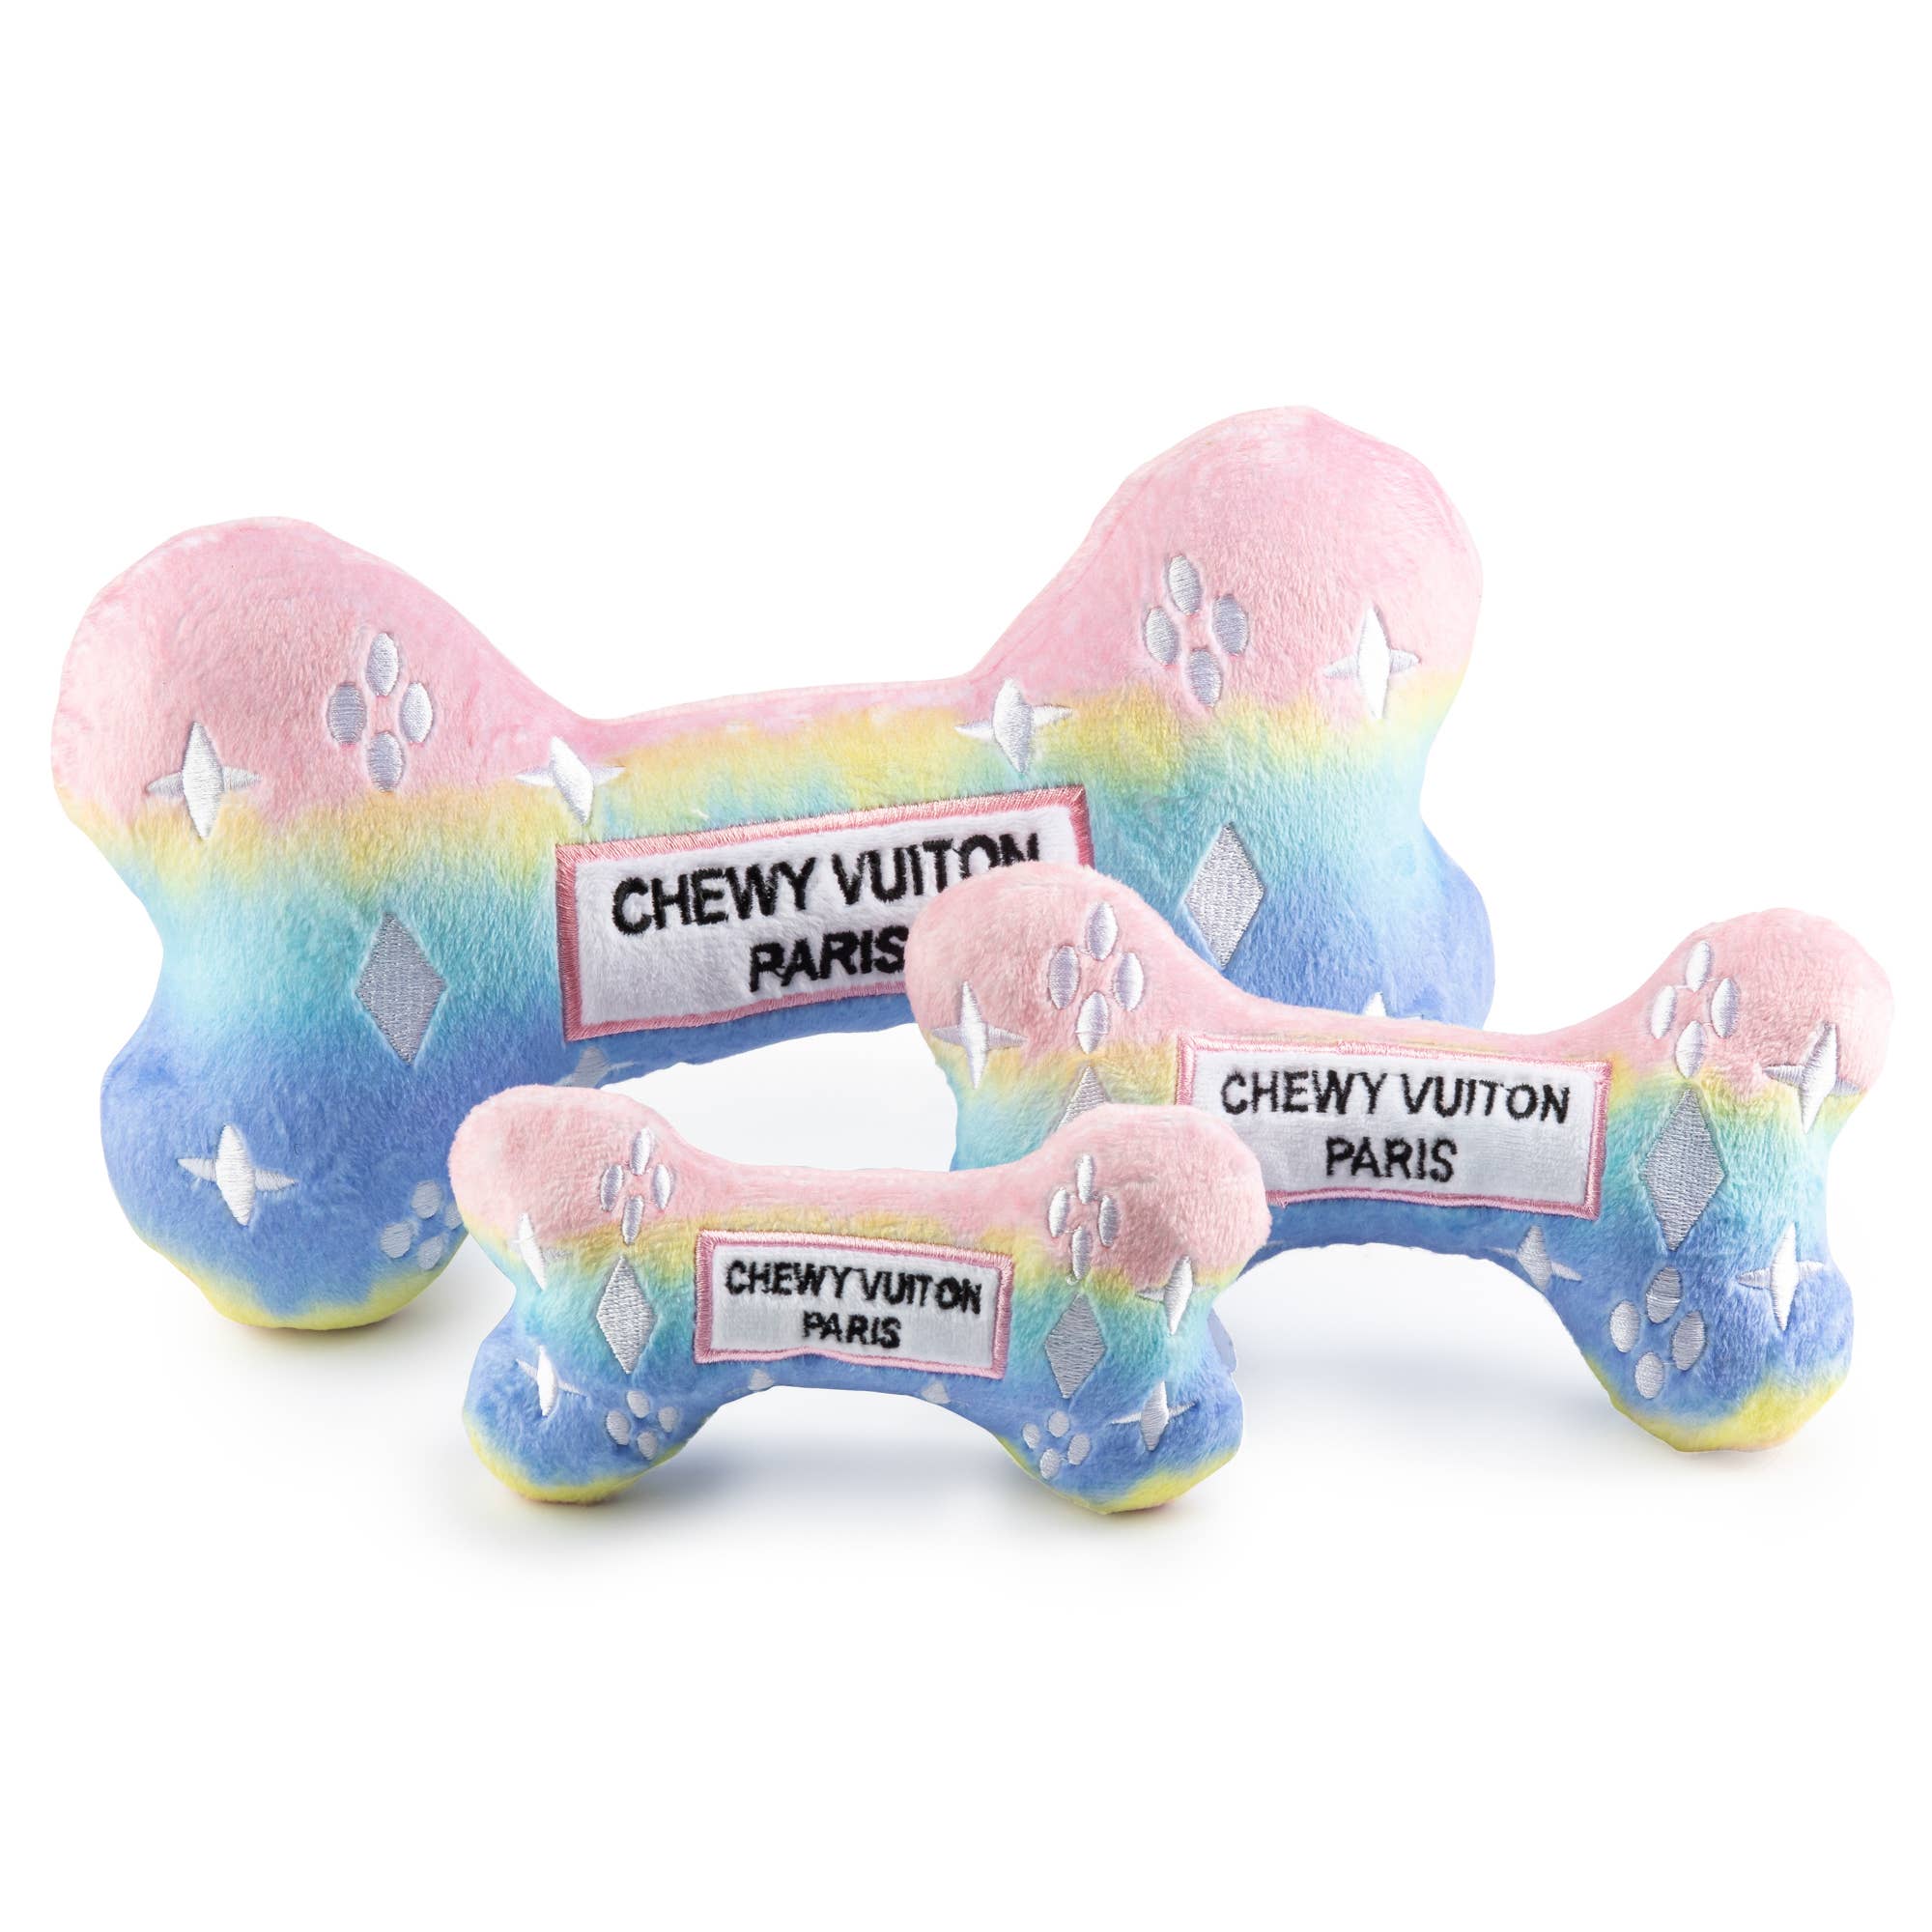 Chewy Vuitton Bone Dog Toy - Pink Ombre